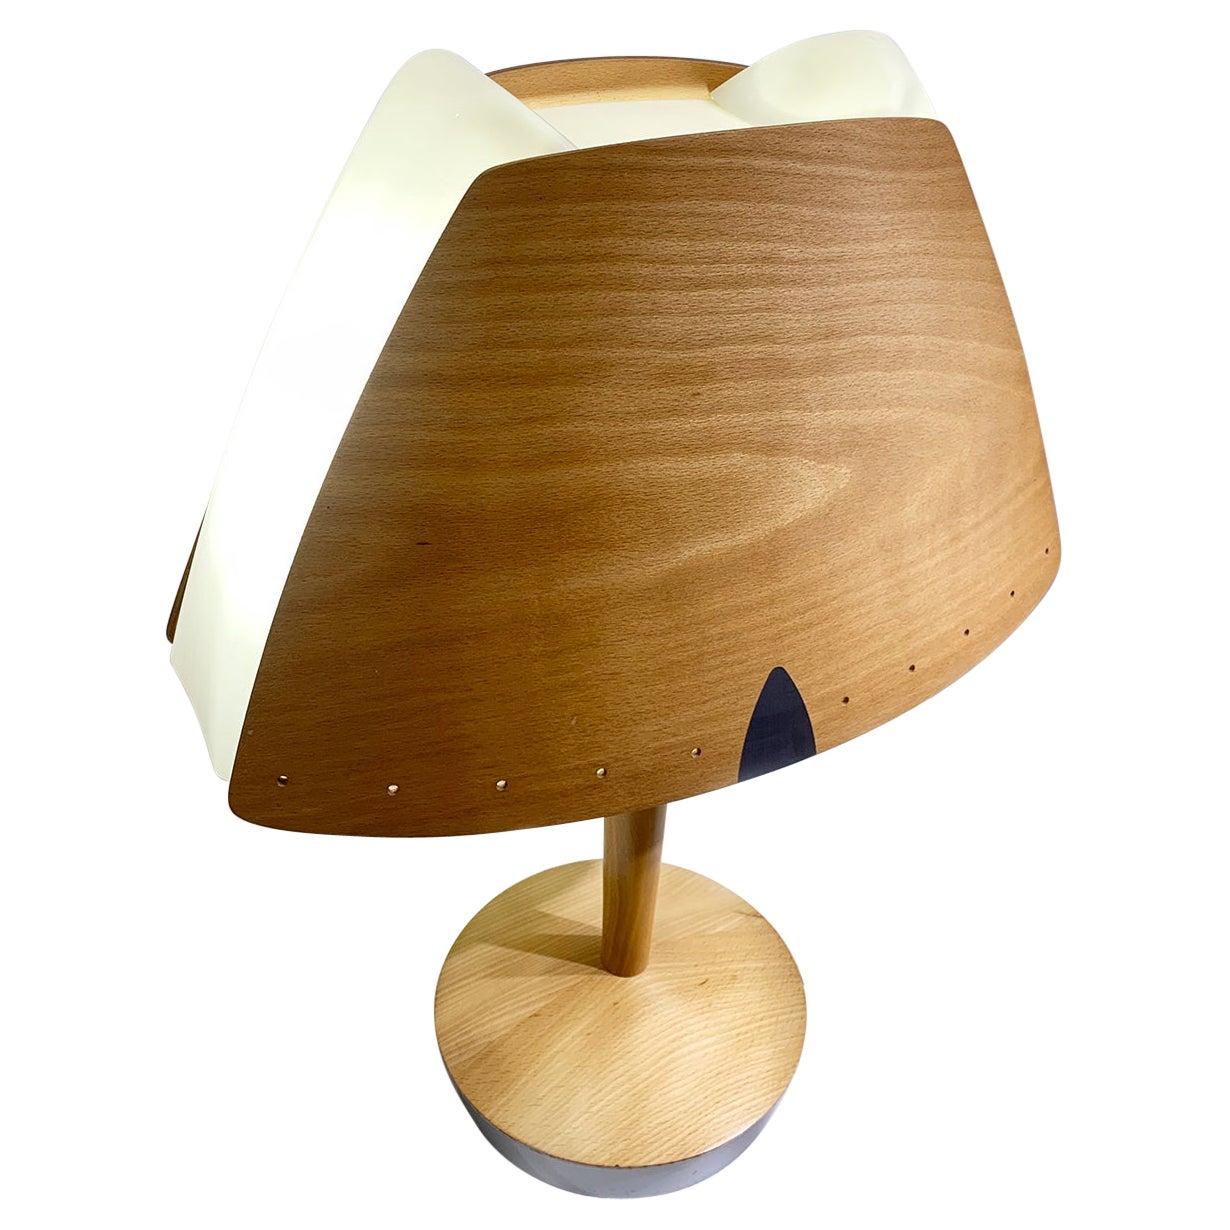 Midcentury French Design Wooden Table Lamp by Lucid, 1970s For Sale